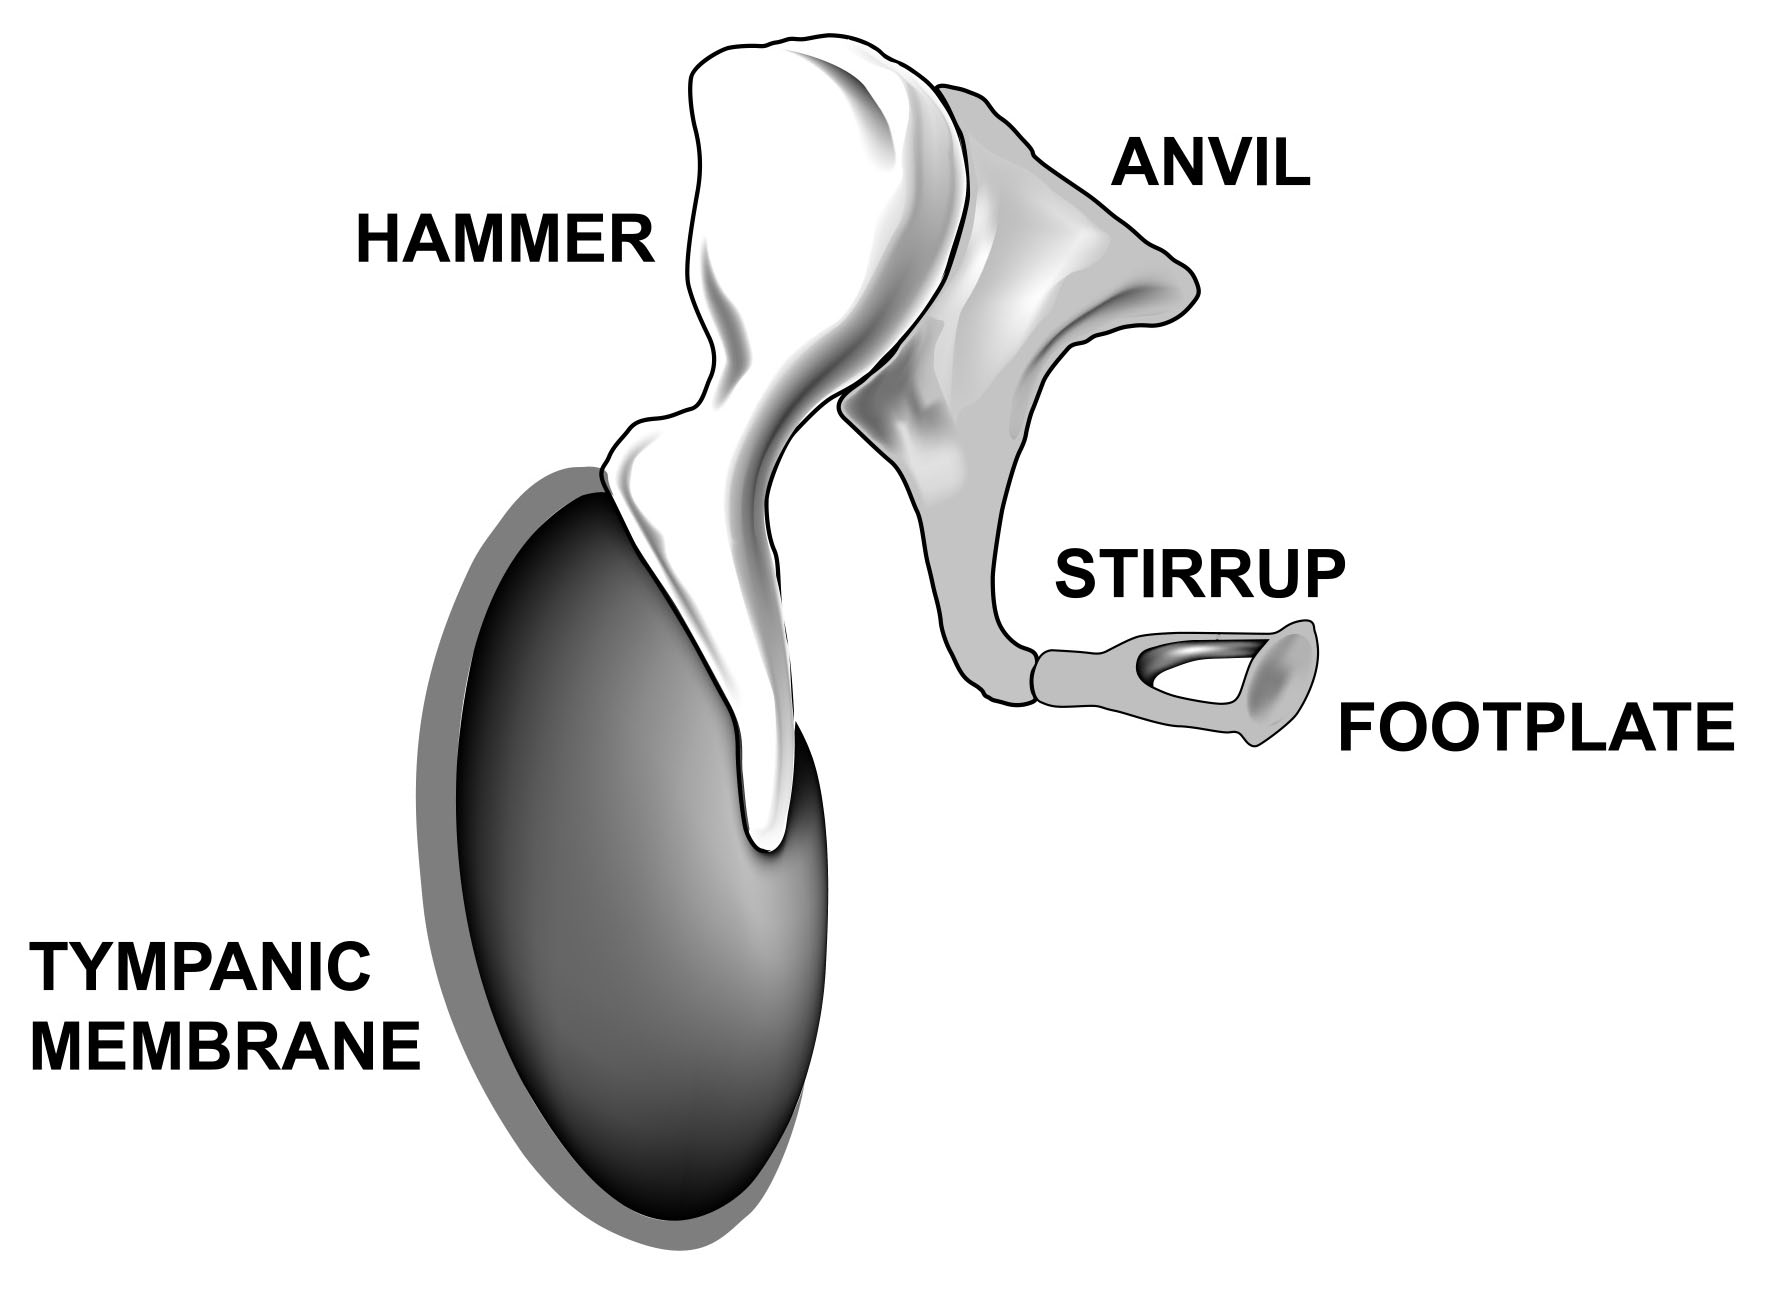 anvil ear also called orricle